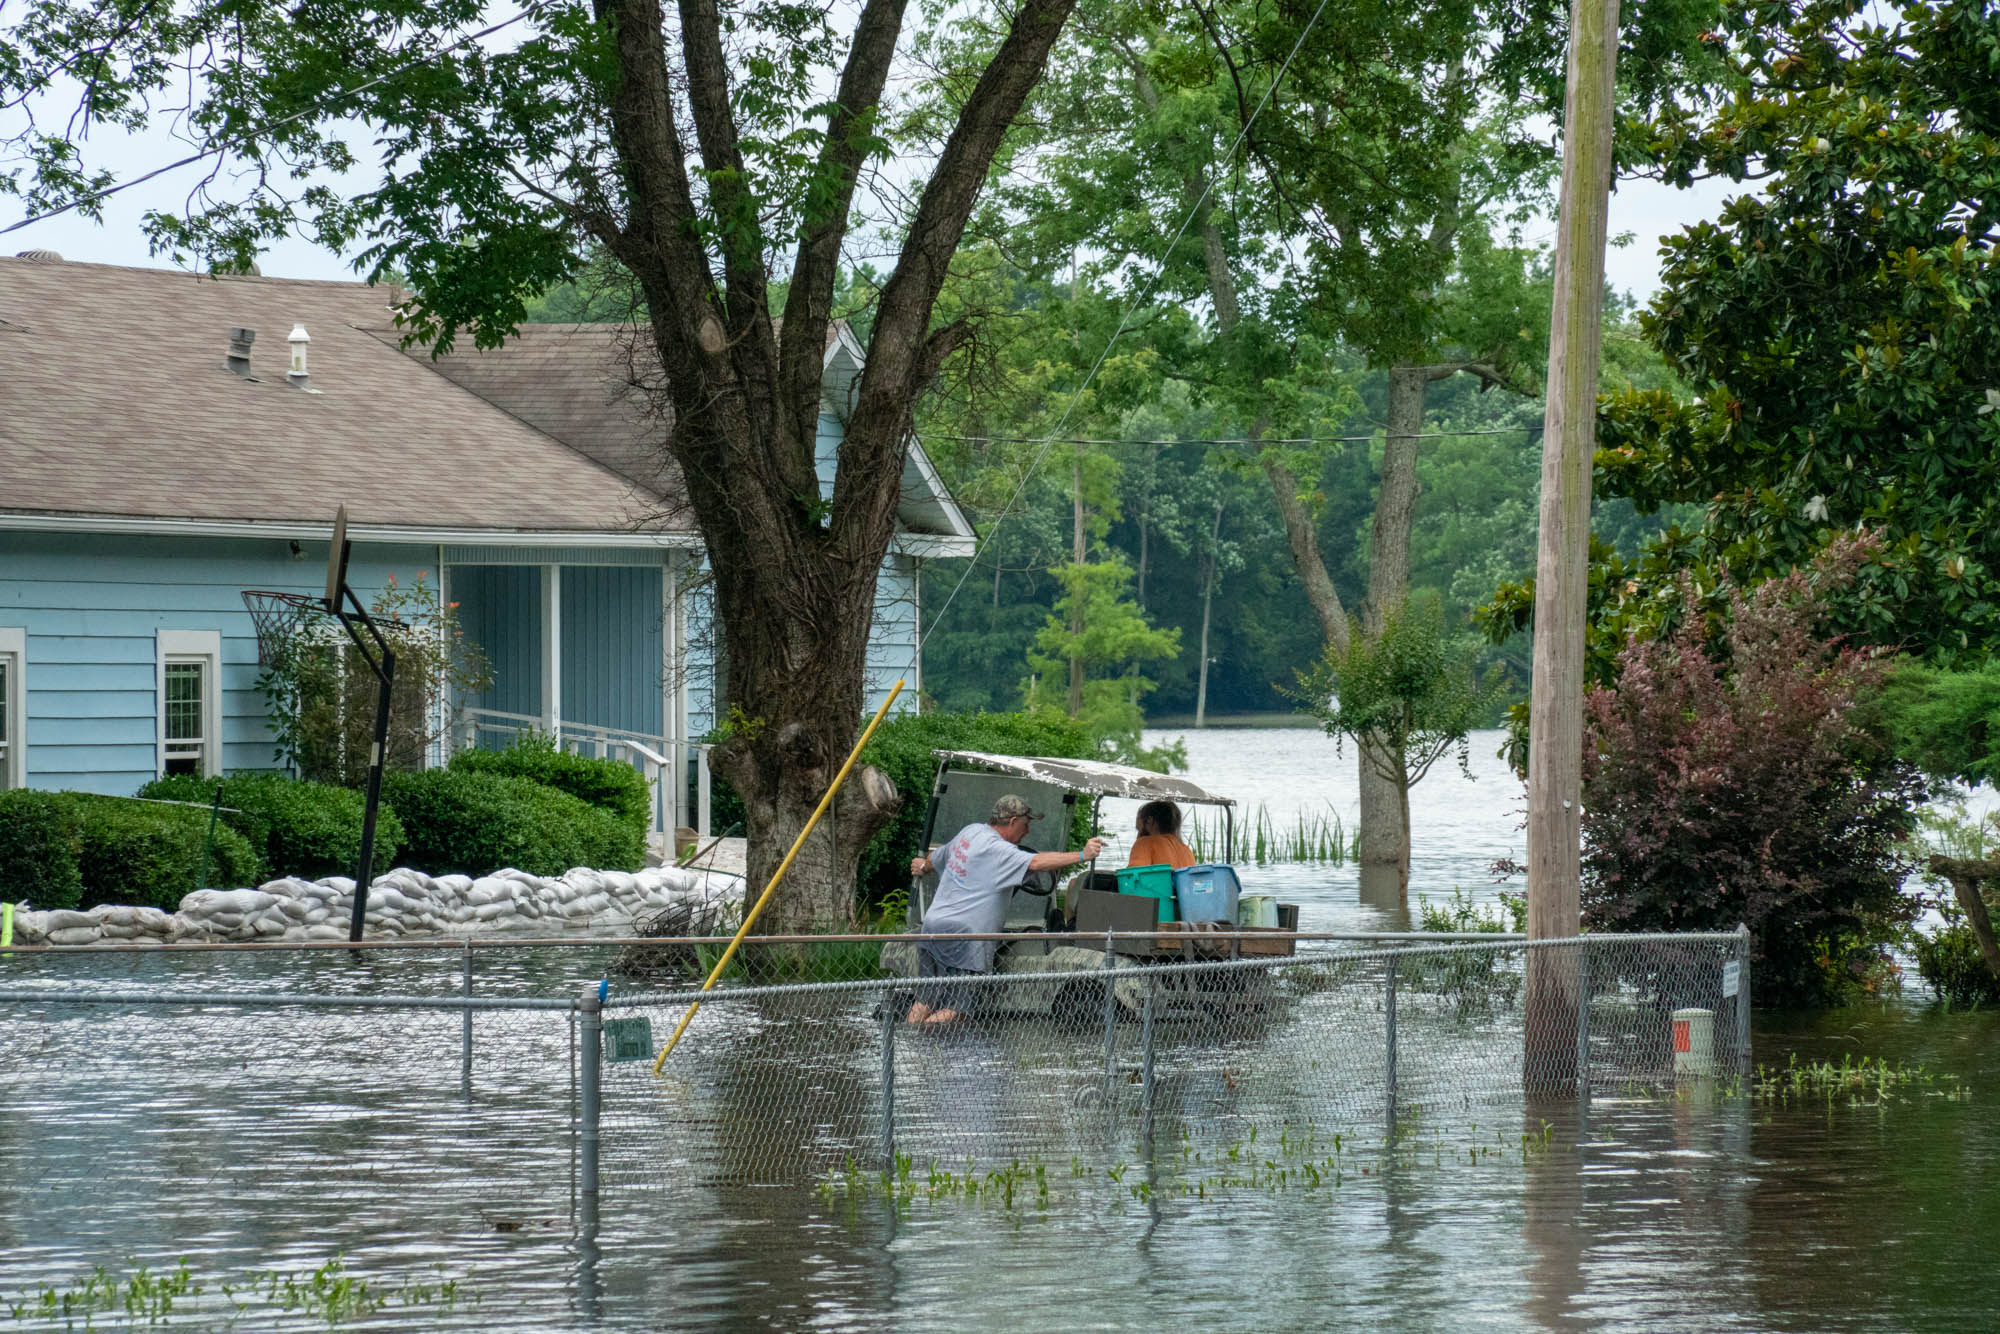 Last spring’s record flooding of the Arkansas River near Toad Suck also caused nearby Lake Conway to overflow, engulfing lakefront homes. (Jordan Laird/News21)